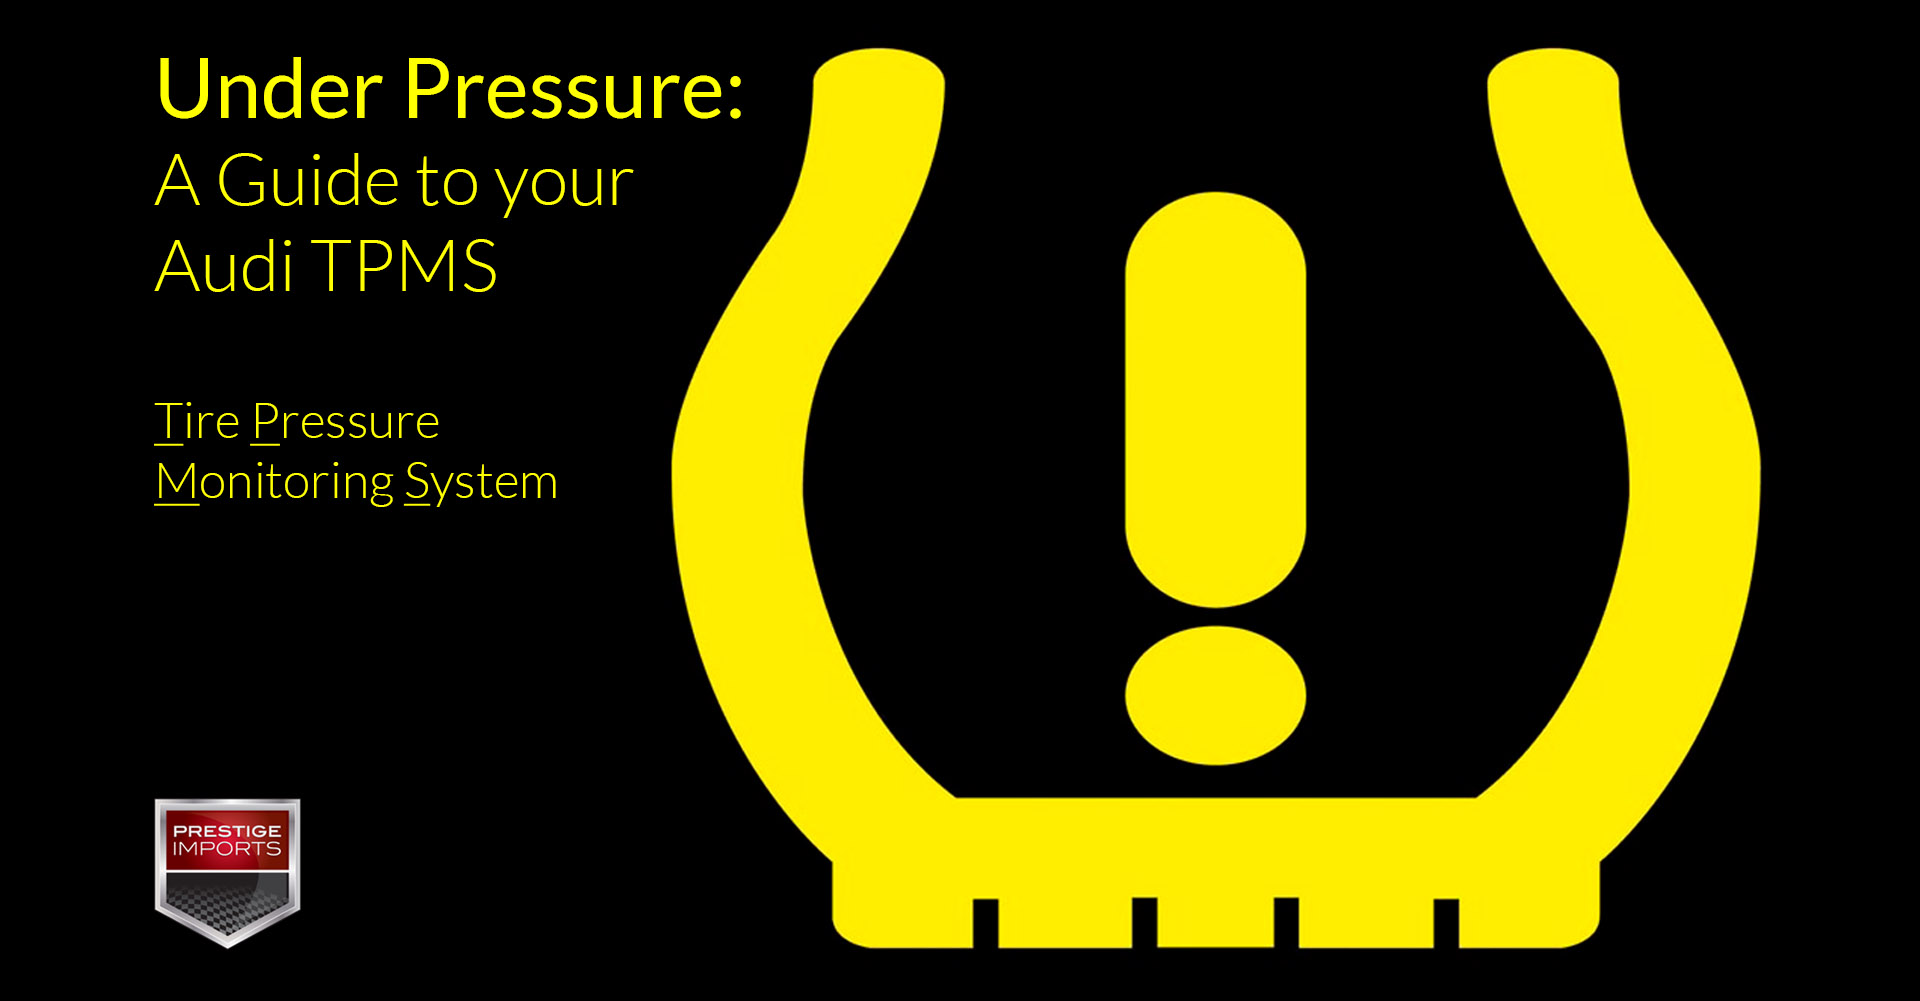 Illustration of the Audi TPMS light. Used to illustrate the article "Under Pressure: A Guide to your Audi TPMS (Tire Pressure Monitoring System)"